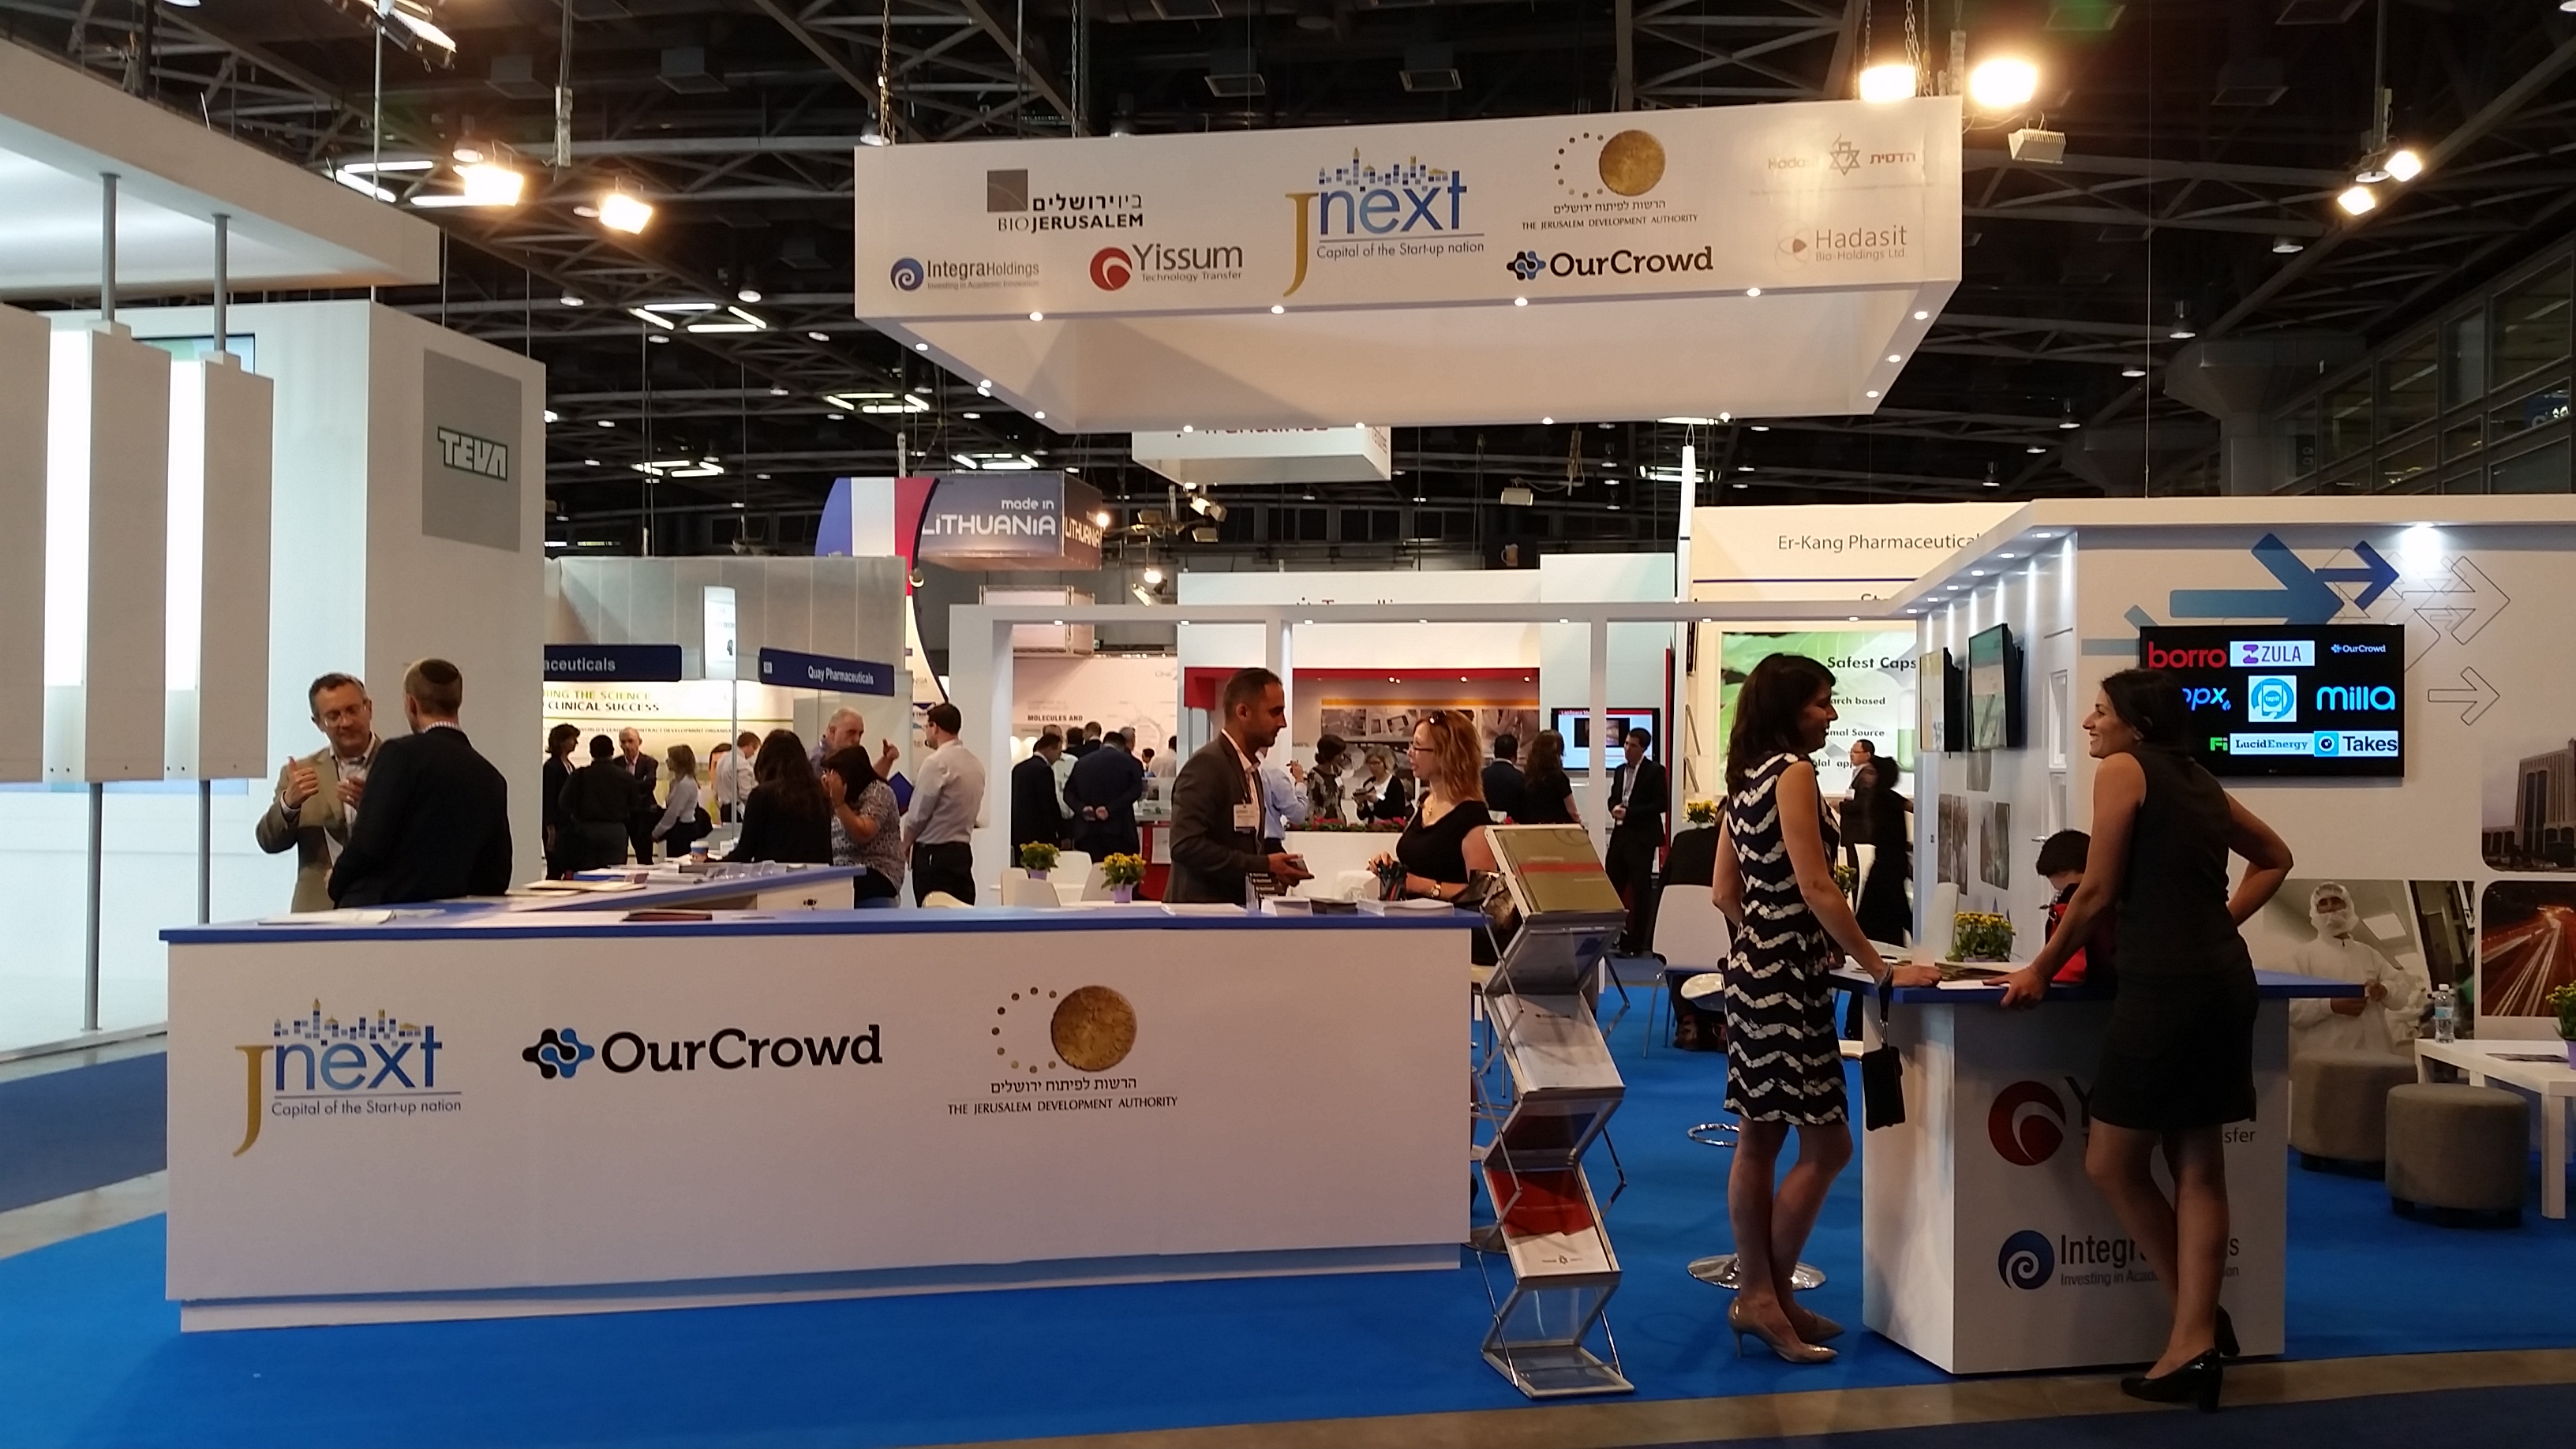 OurCrowd at BioMed 2015